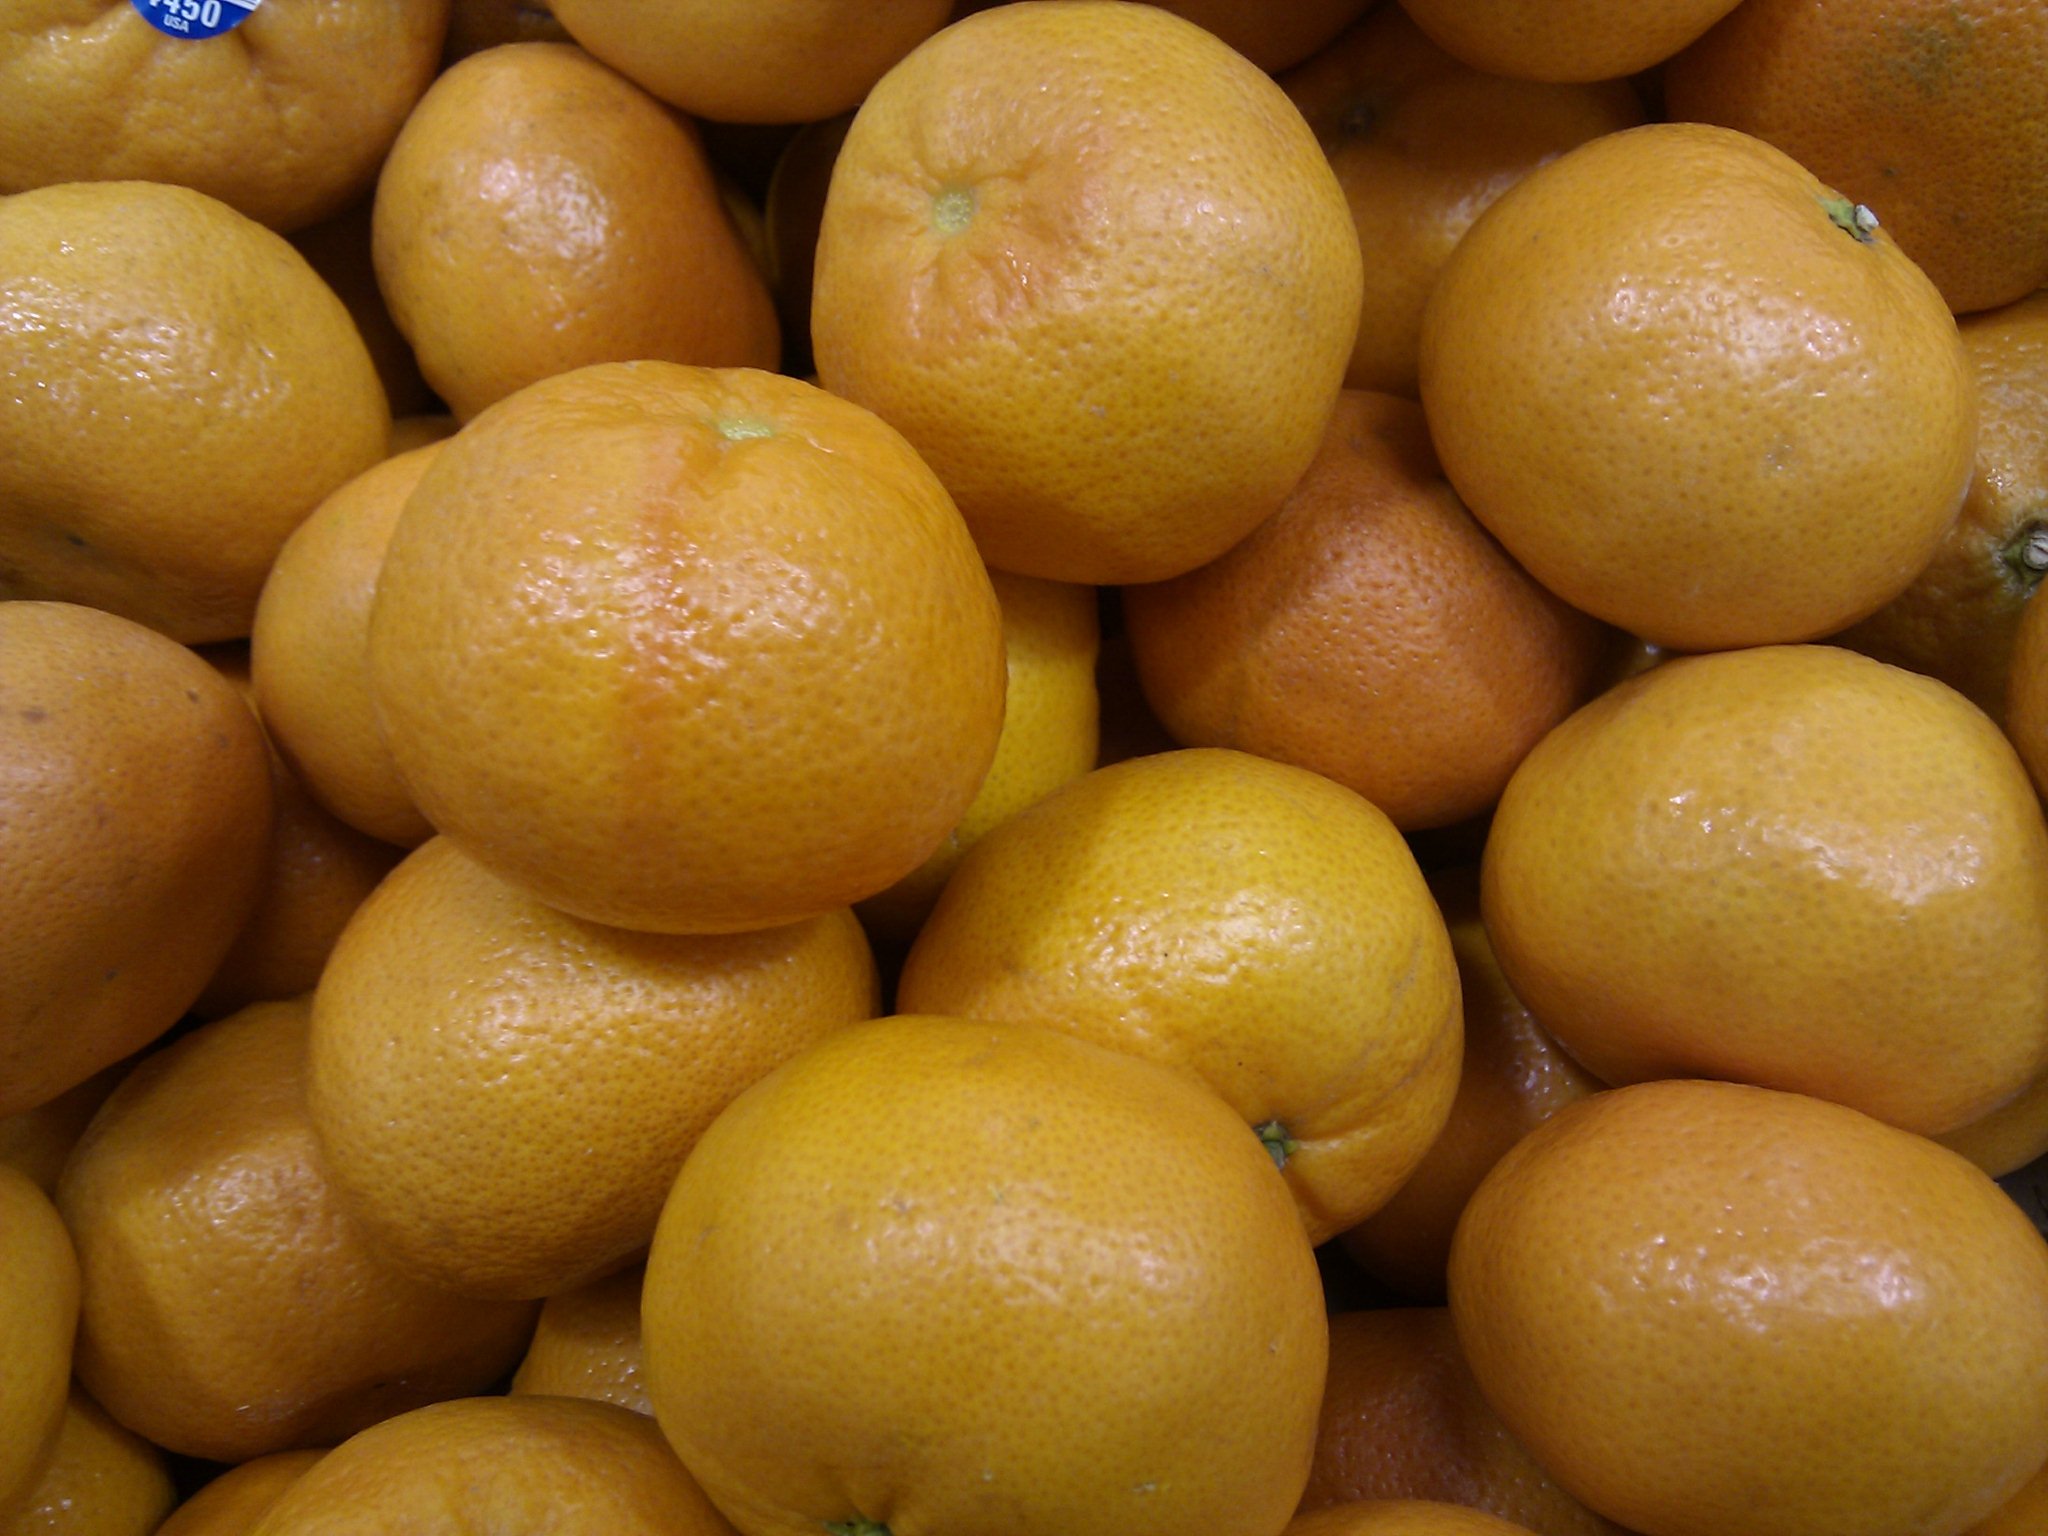 a group of oranges piled on top of each other